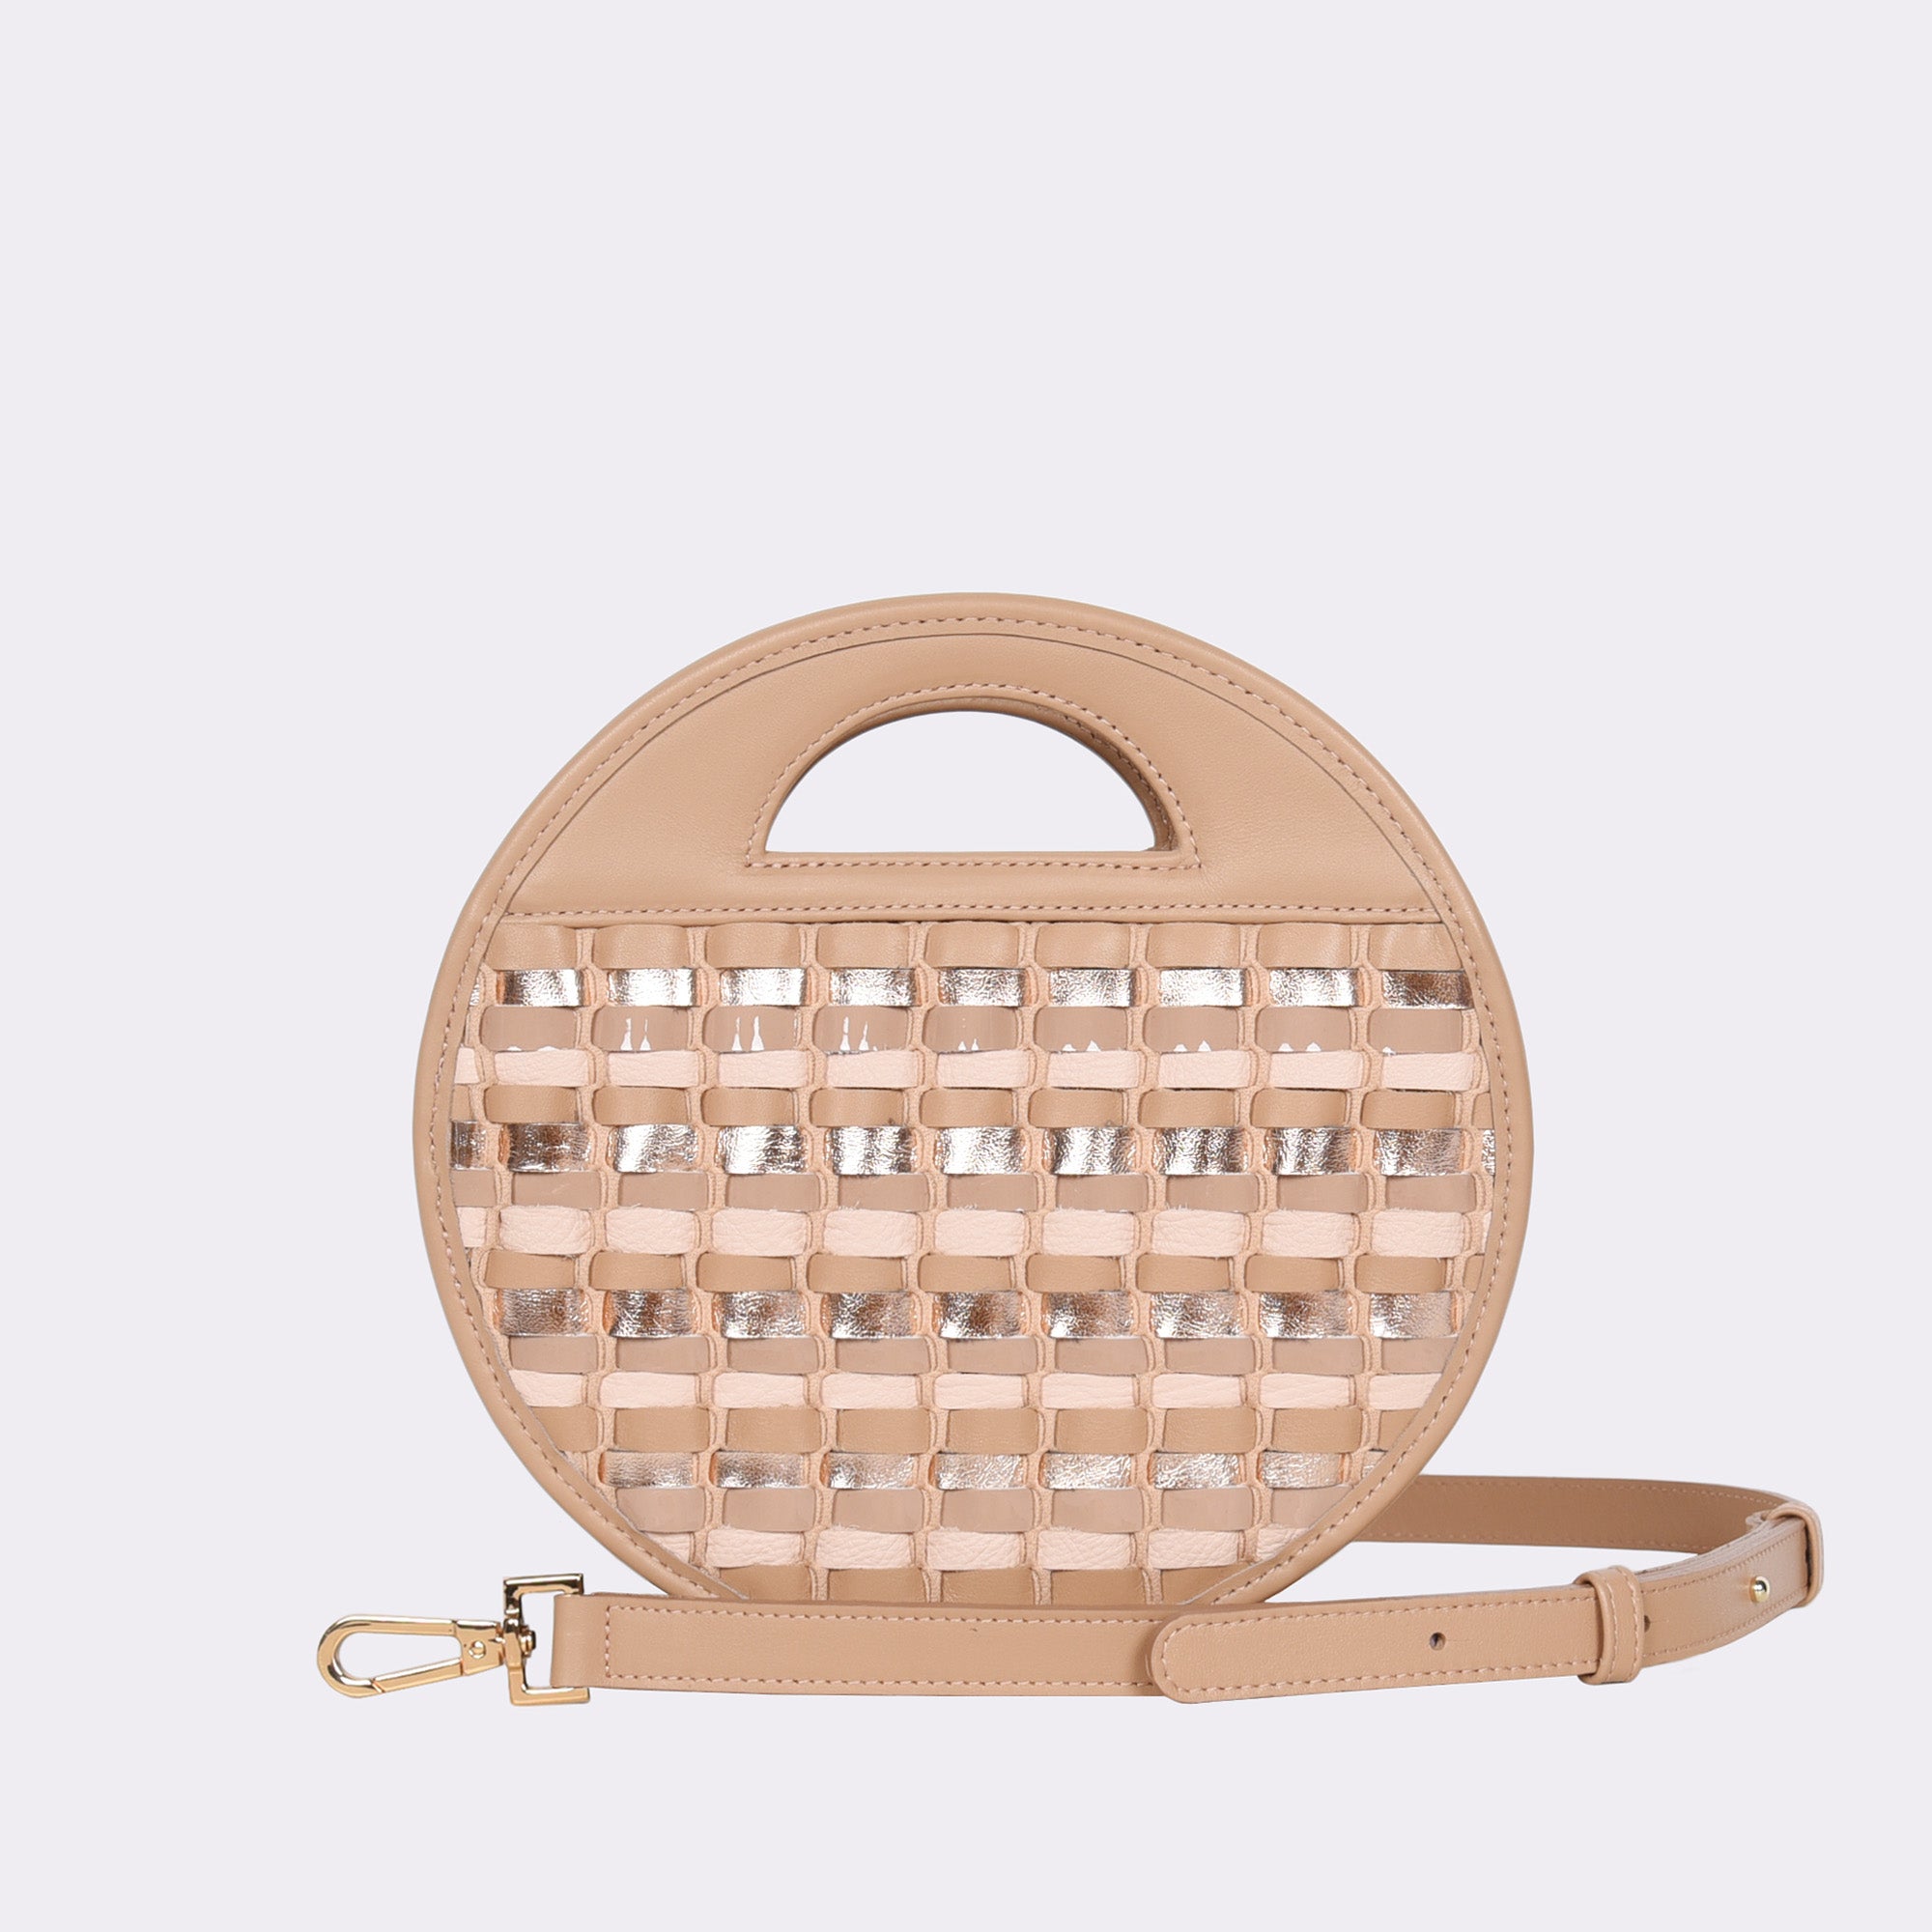 Picture of American made luxury top handle round crossbody bag with various tan and silver toned handwoven leathers.